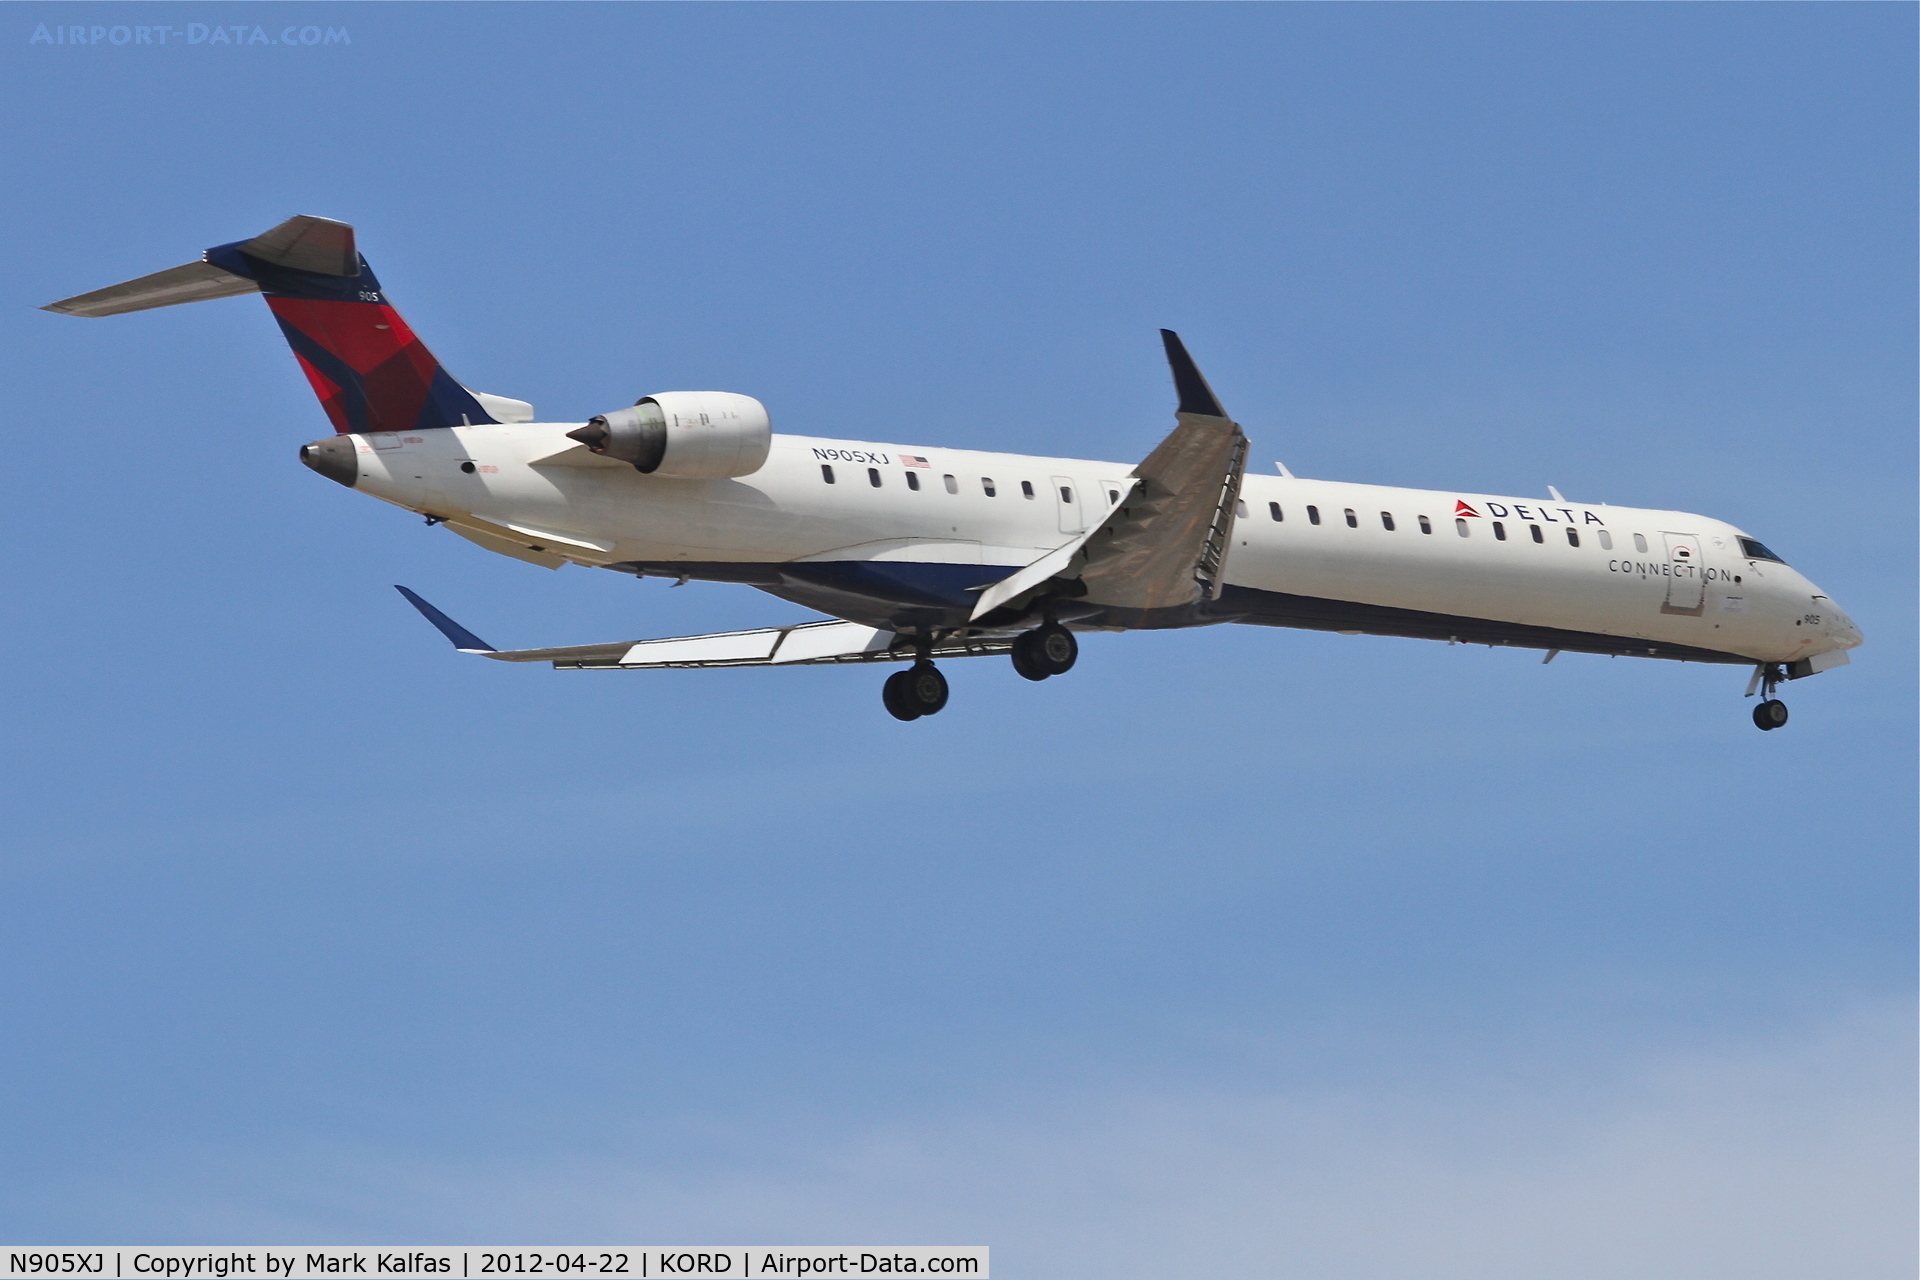 N905XJ, 2007 Bombardier CRJ-900 (CL-600-2D24) C/N 15137, Pinnacle Airlines/Delta Connection, FLG3586 arriving from KMSP, RWY 10 approach KORD.